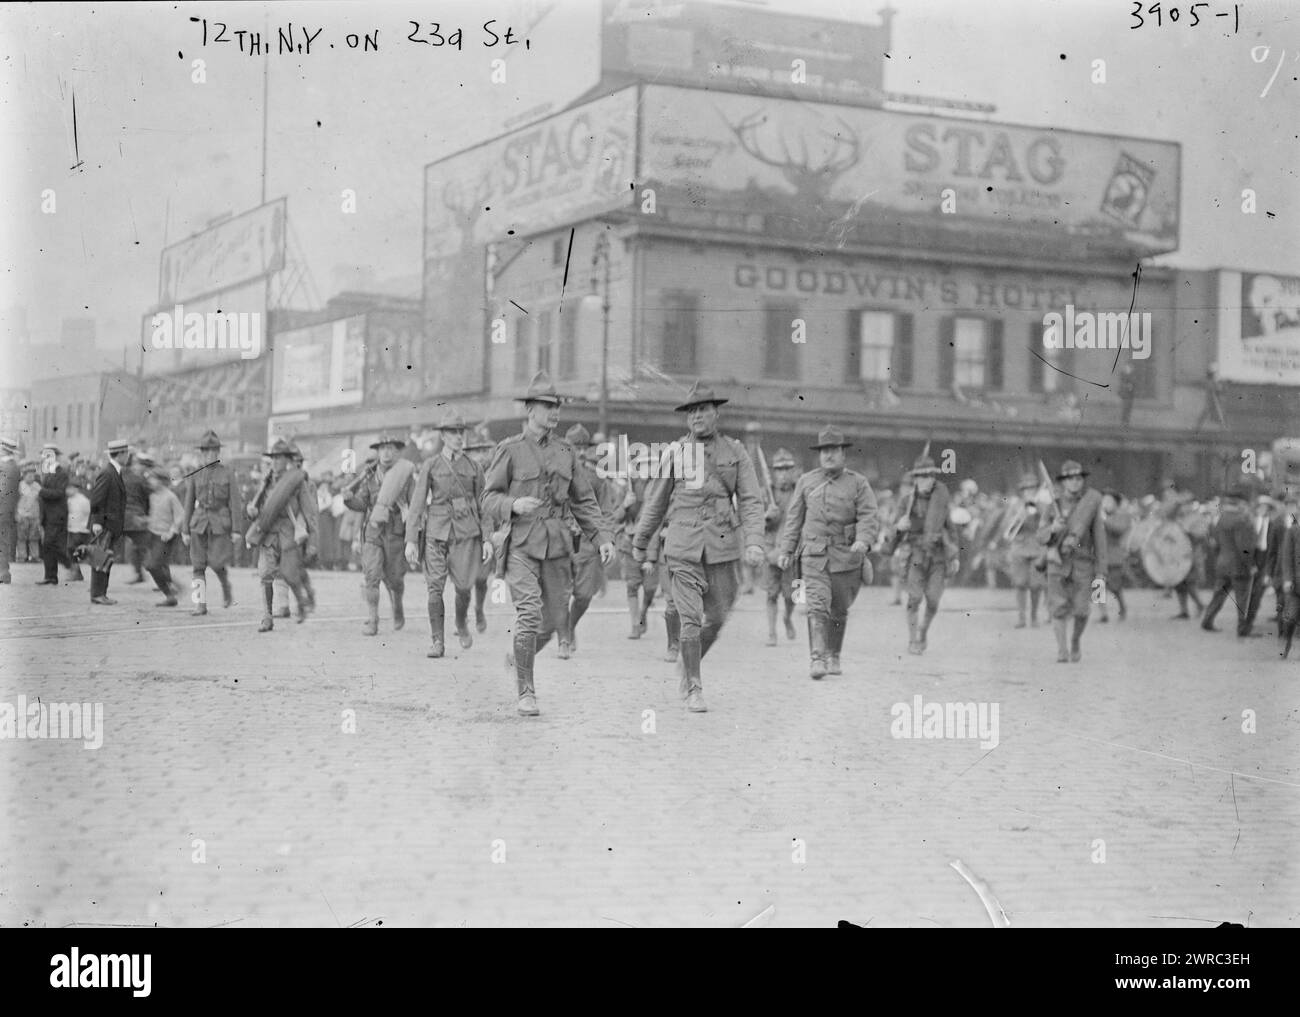 12th N.Y. on 23d St., Photograph shows the 12th New York Infantry of the National Guard in New York before heading for the Mexican border in June 1916., 1916 July, Glass negatives, 1 negative: glass Stock Photo